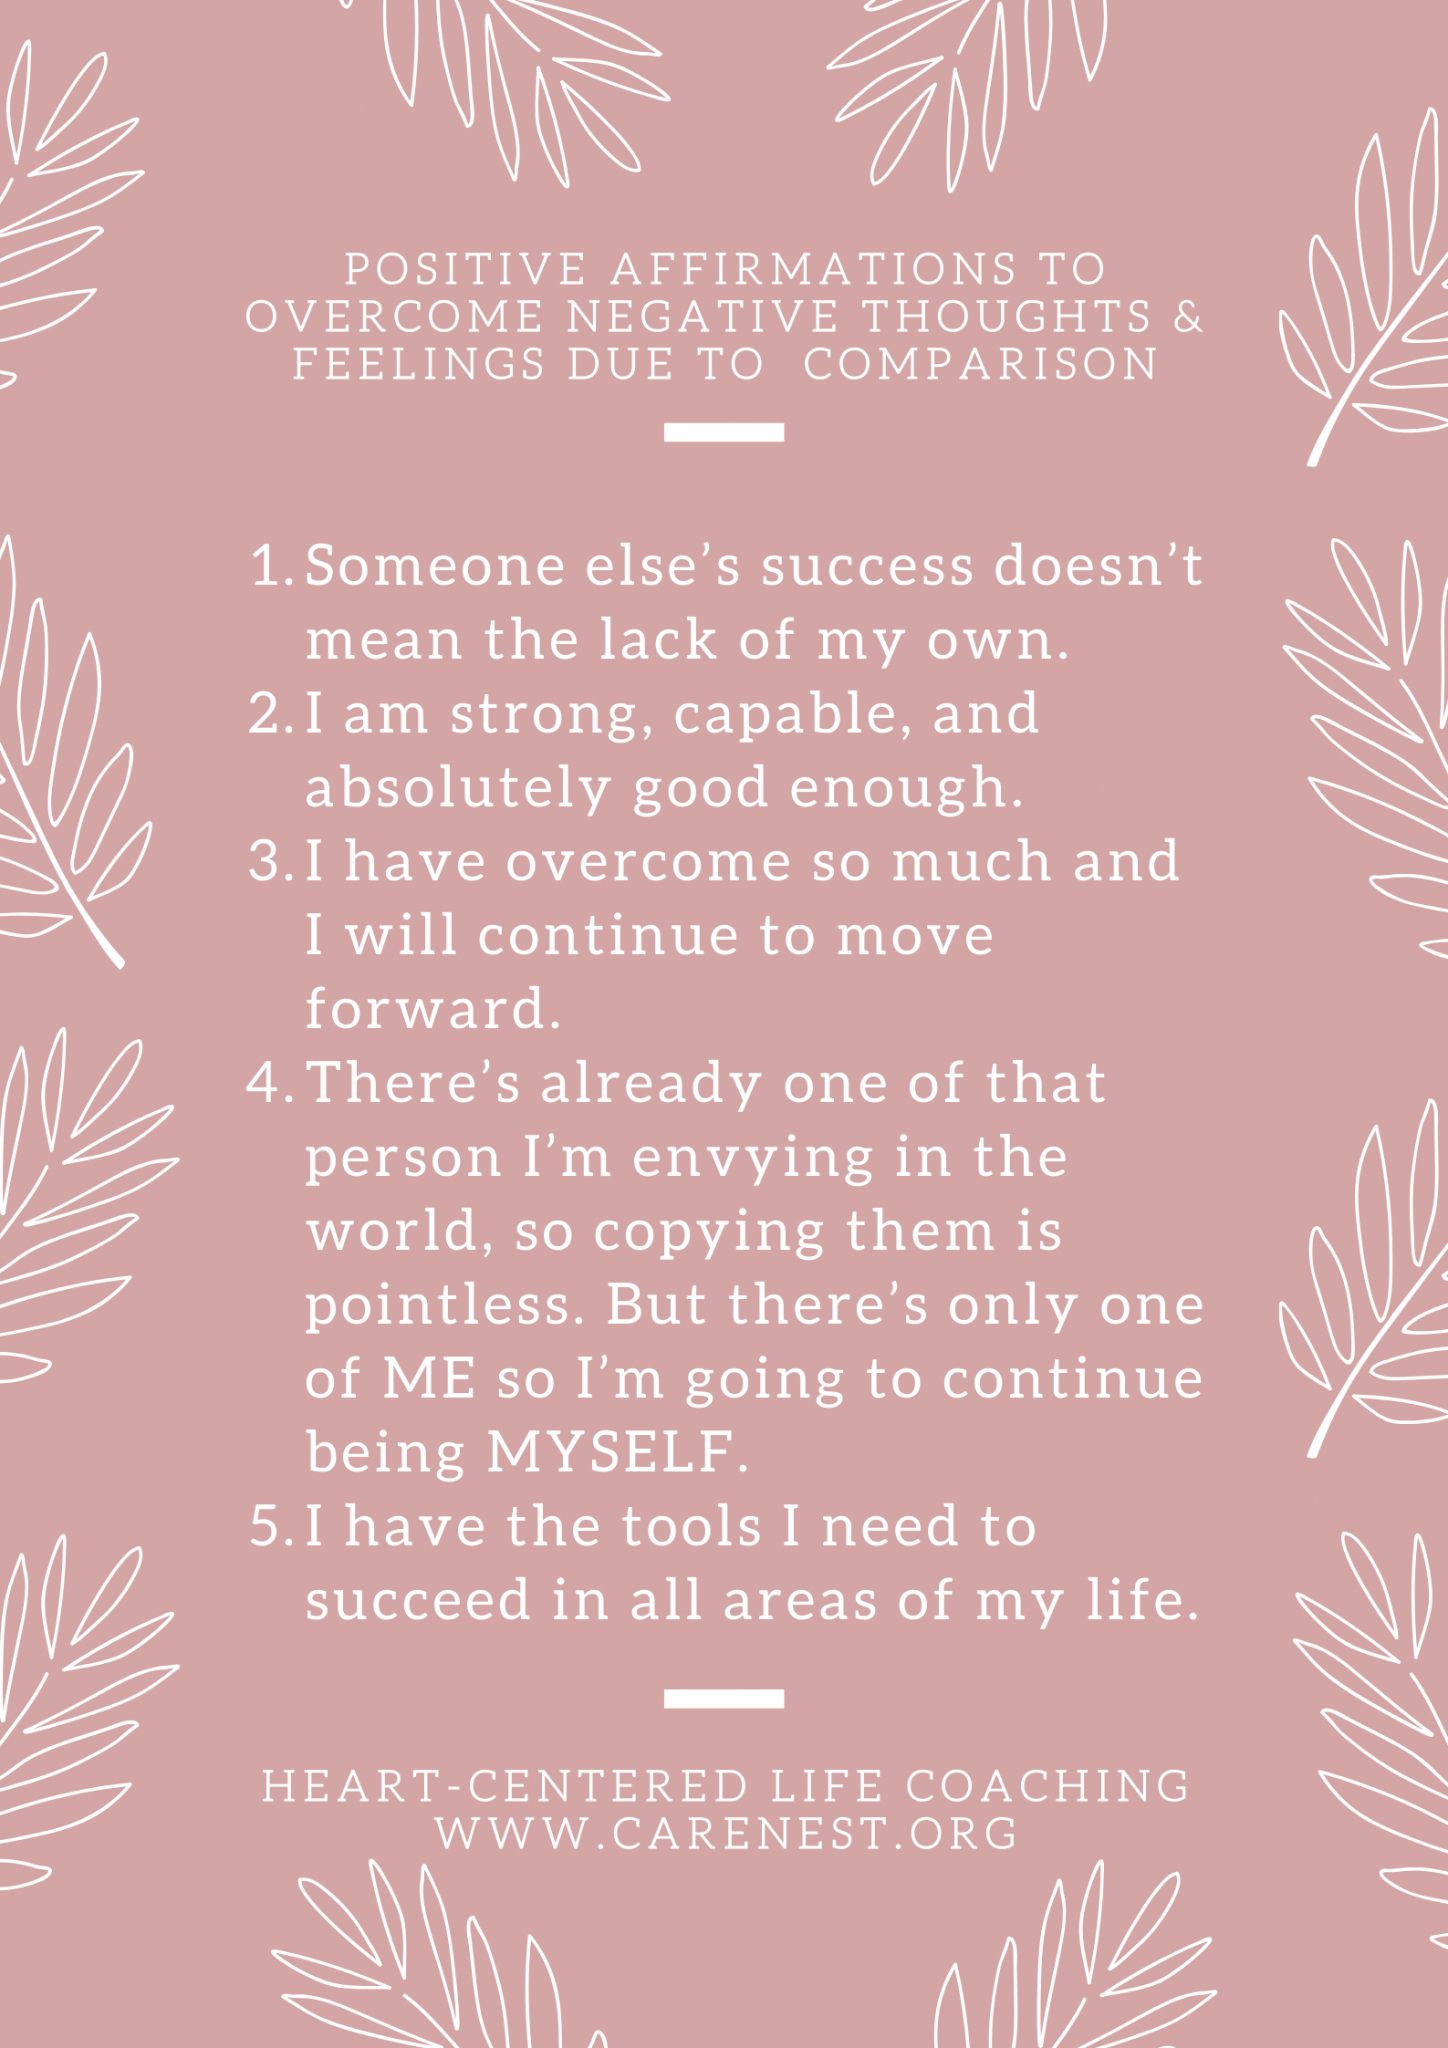 How to Prevent Comparison from Ruining Your Life (+ FREE Affirmations ...